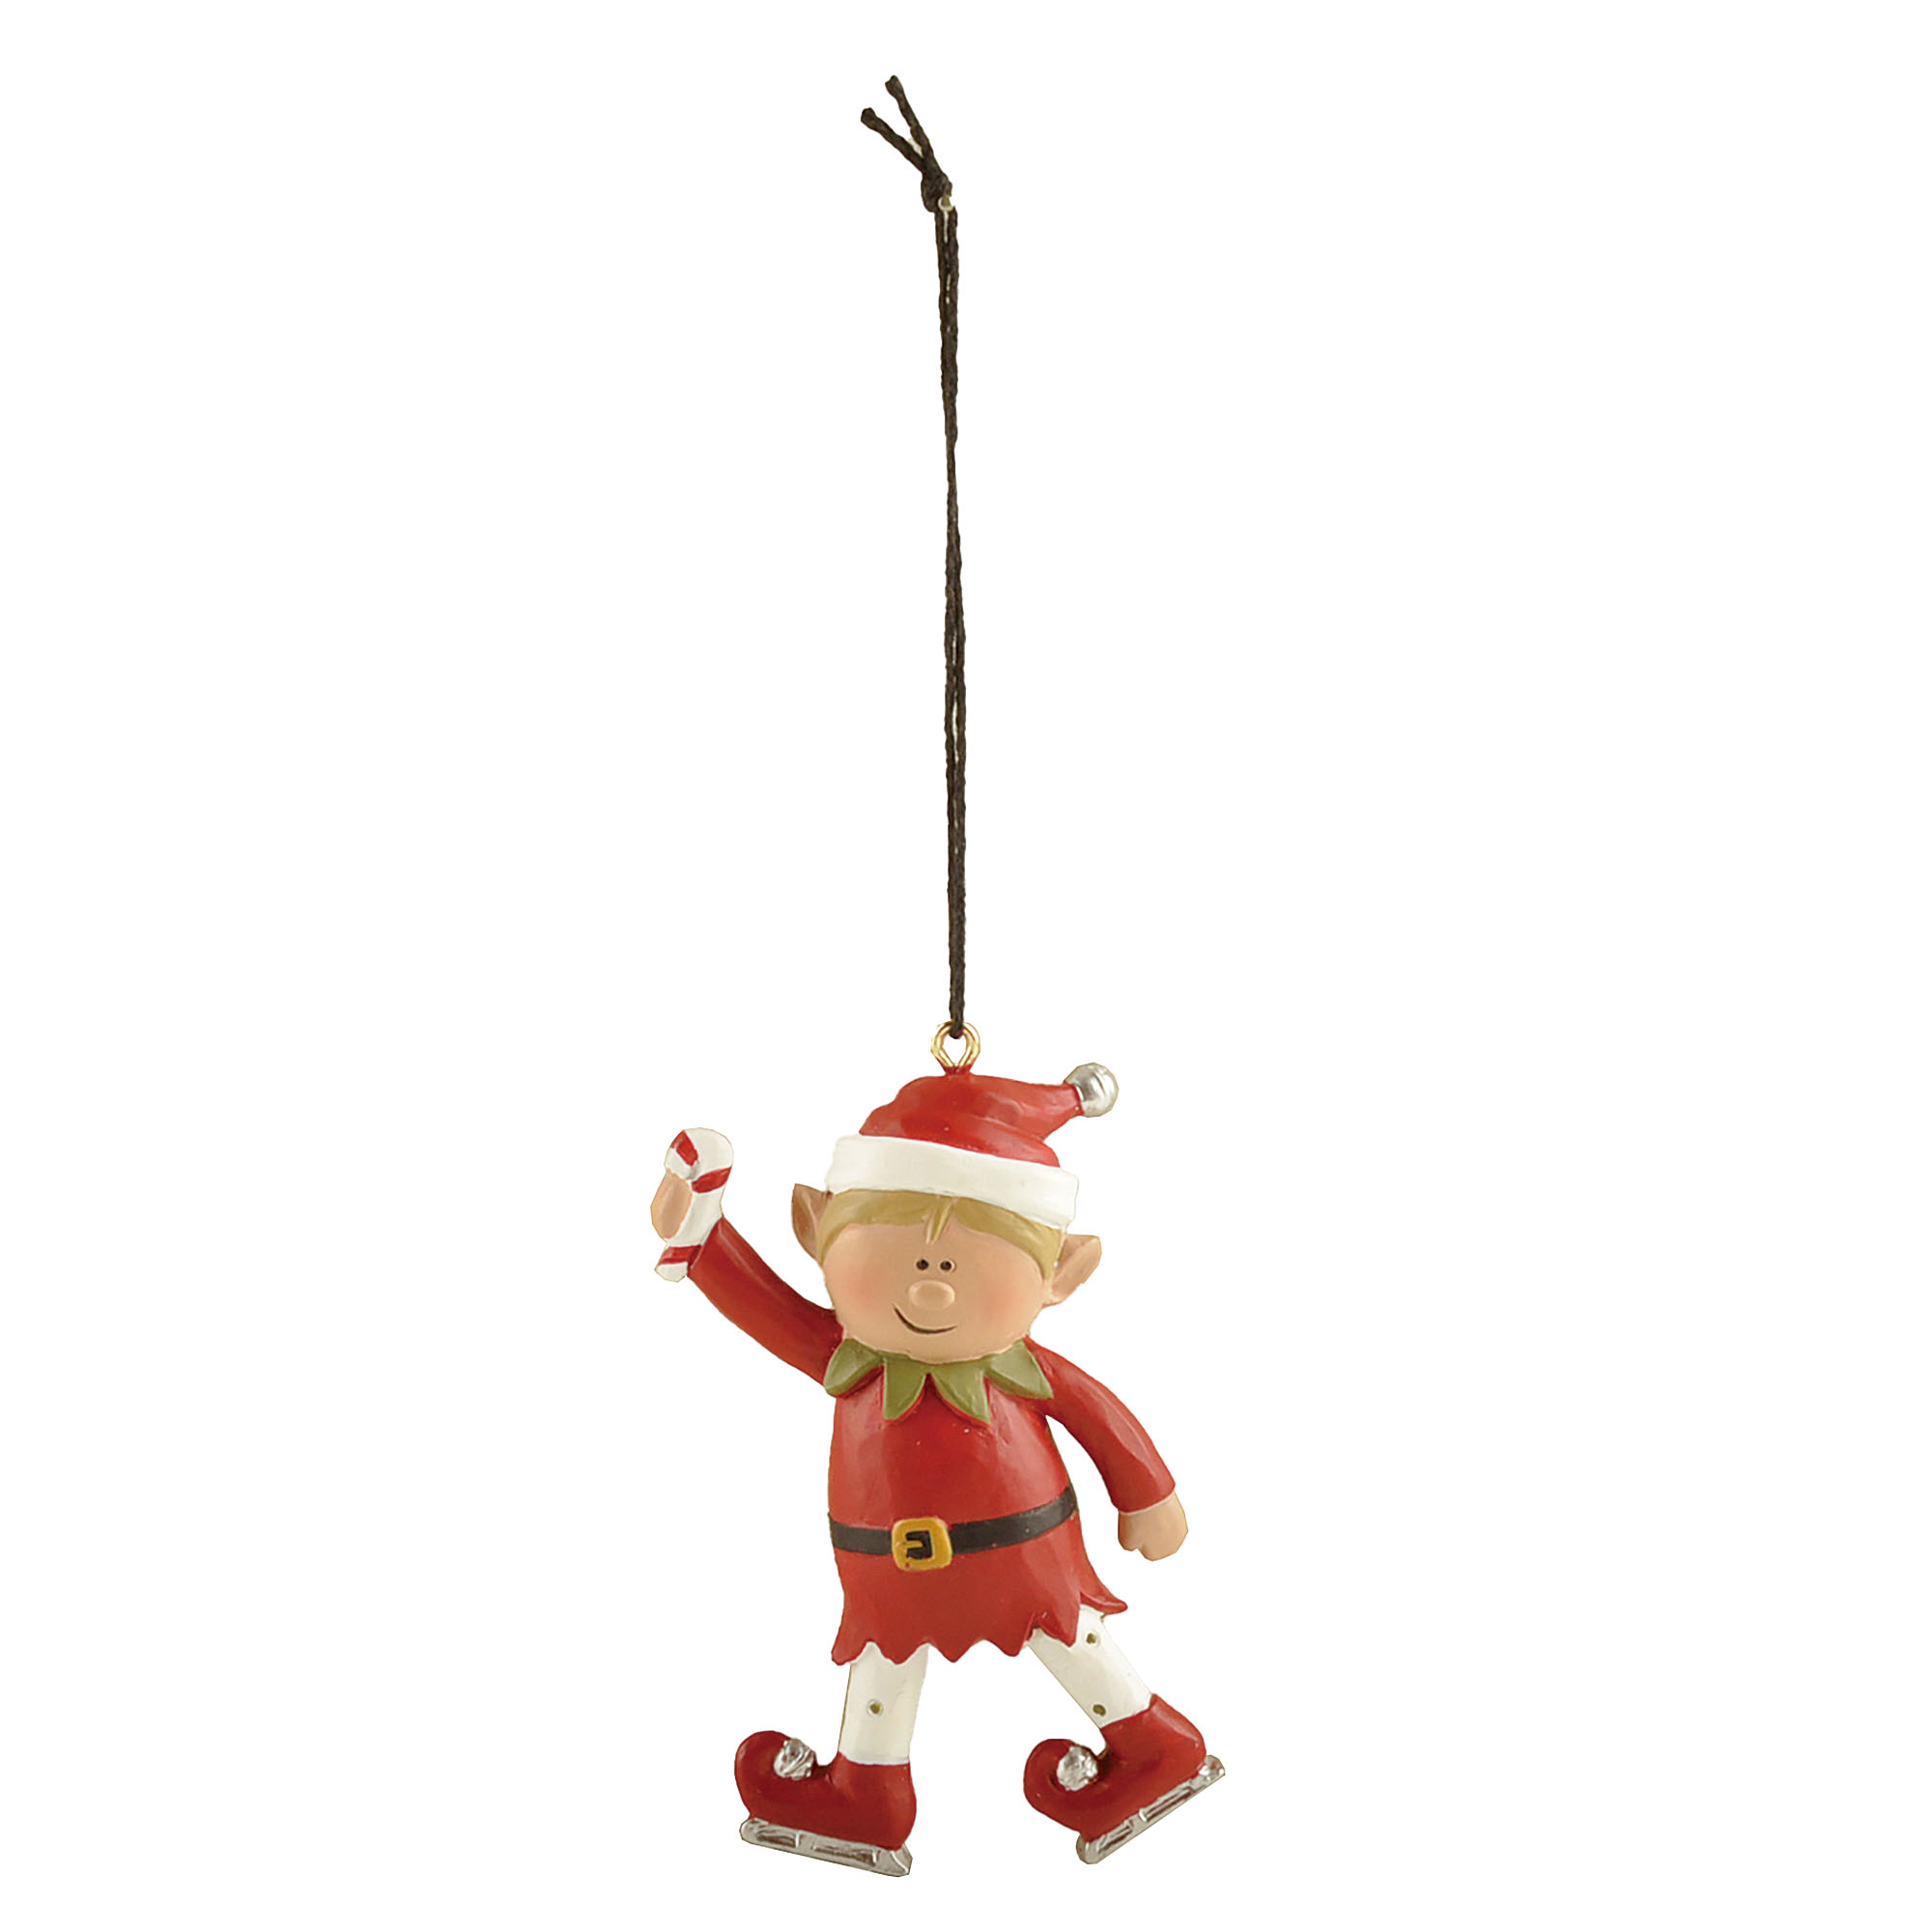 Adorable Resin Elf Hanging Ornament with Candy Cane – Festive Christmas Tree Decoration for Holiday Cheer 238-52143